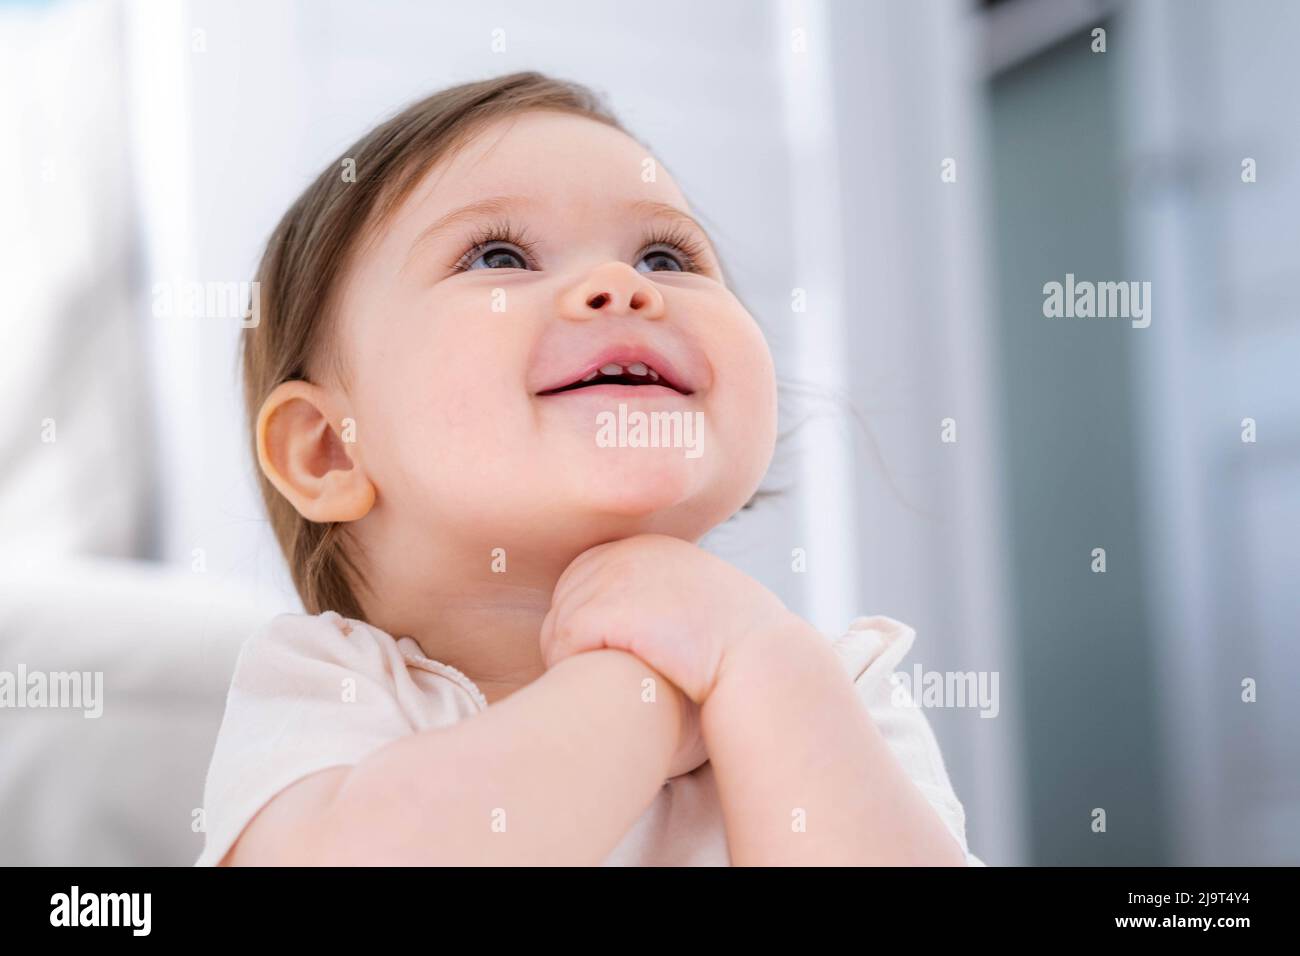 Excited cute little baby girl thinking of something dreaming or having a good idea, smiling and looking up, imagination. Stock Photo